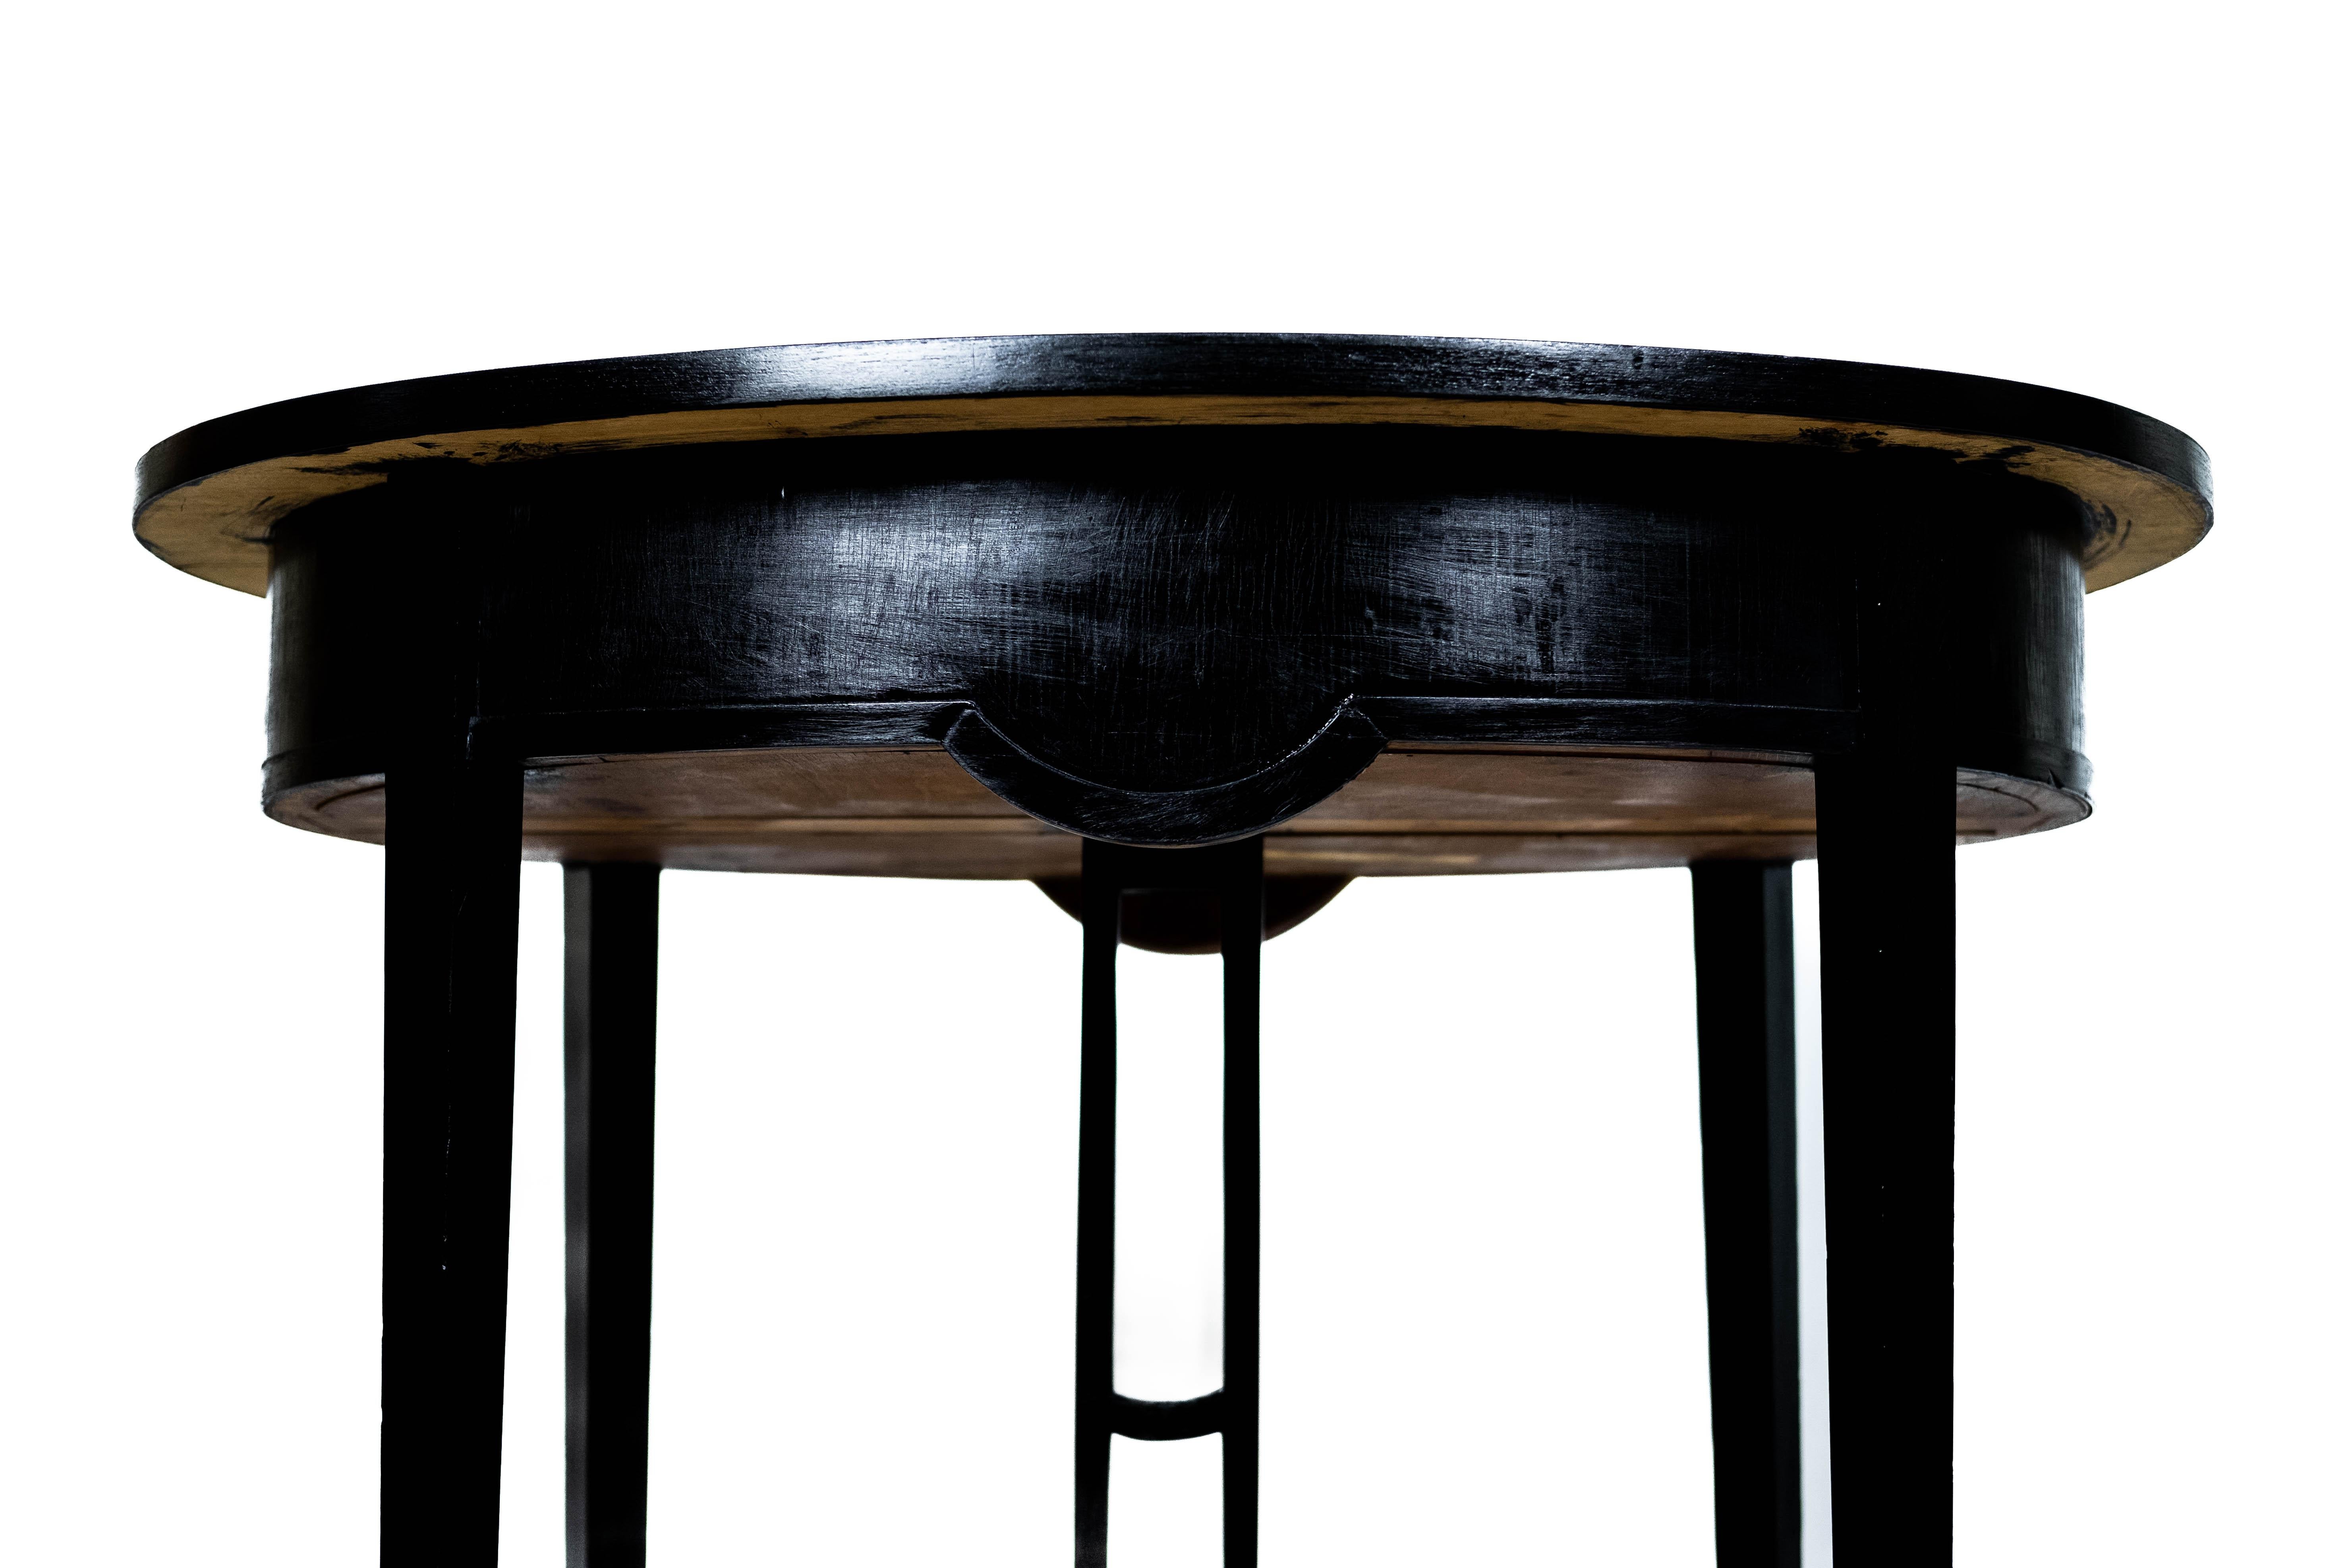 Early 20th Century Small black Art Nouveau Table with Marble-Plate and Brass-Fittings (circa 1910) For Sale